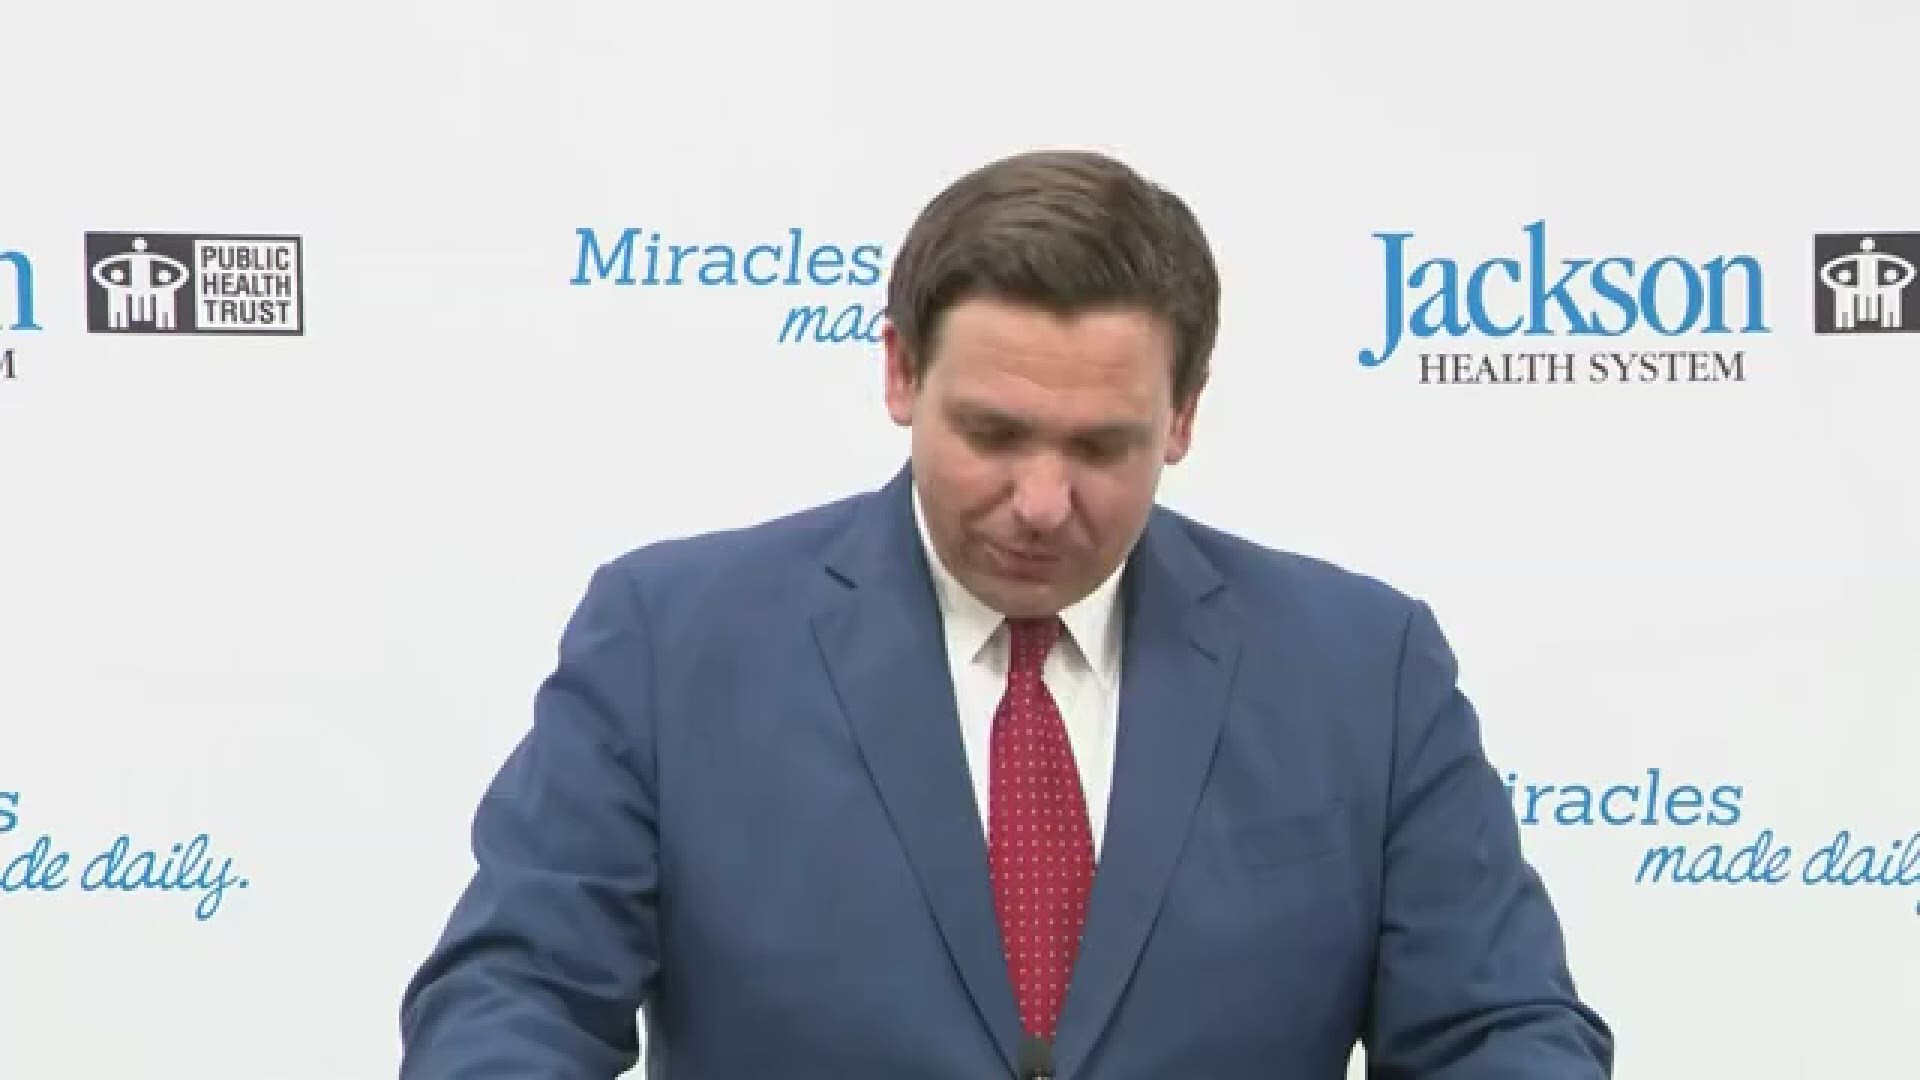 As Florida Gov. Ron DeSantis began his COVID-19 update, an unidentified man shouted over the governor as he tried to talk